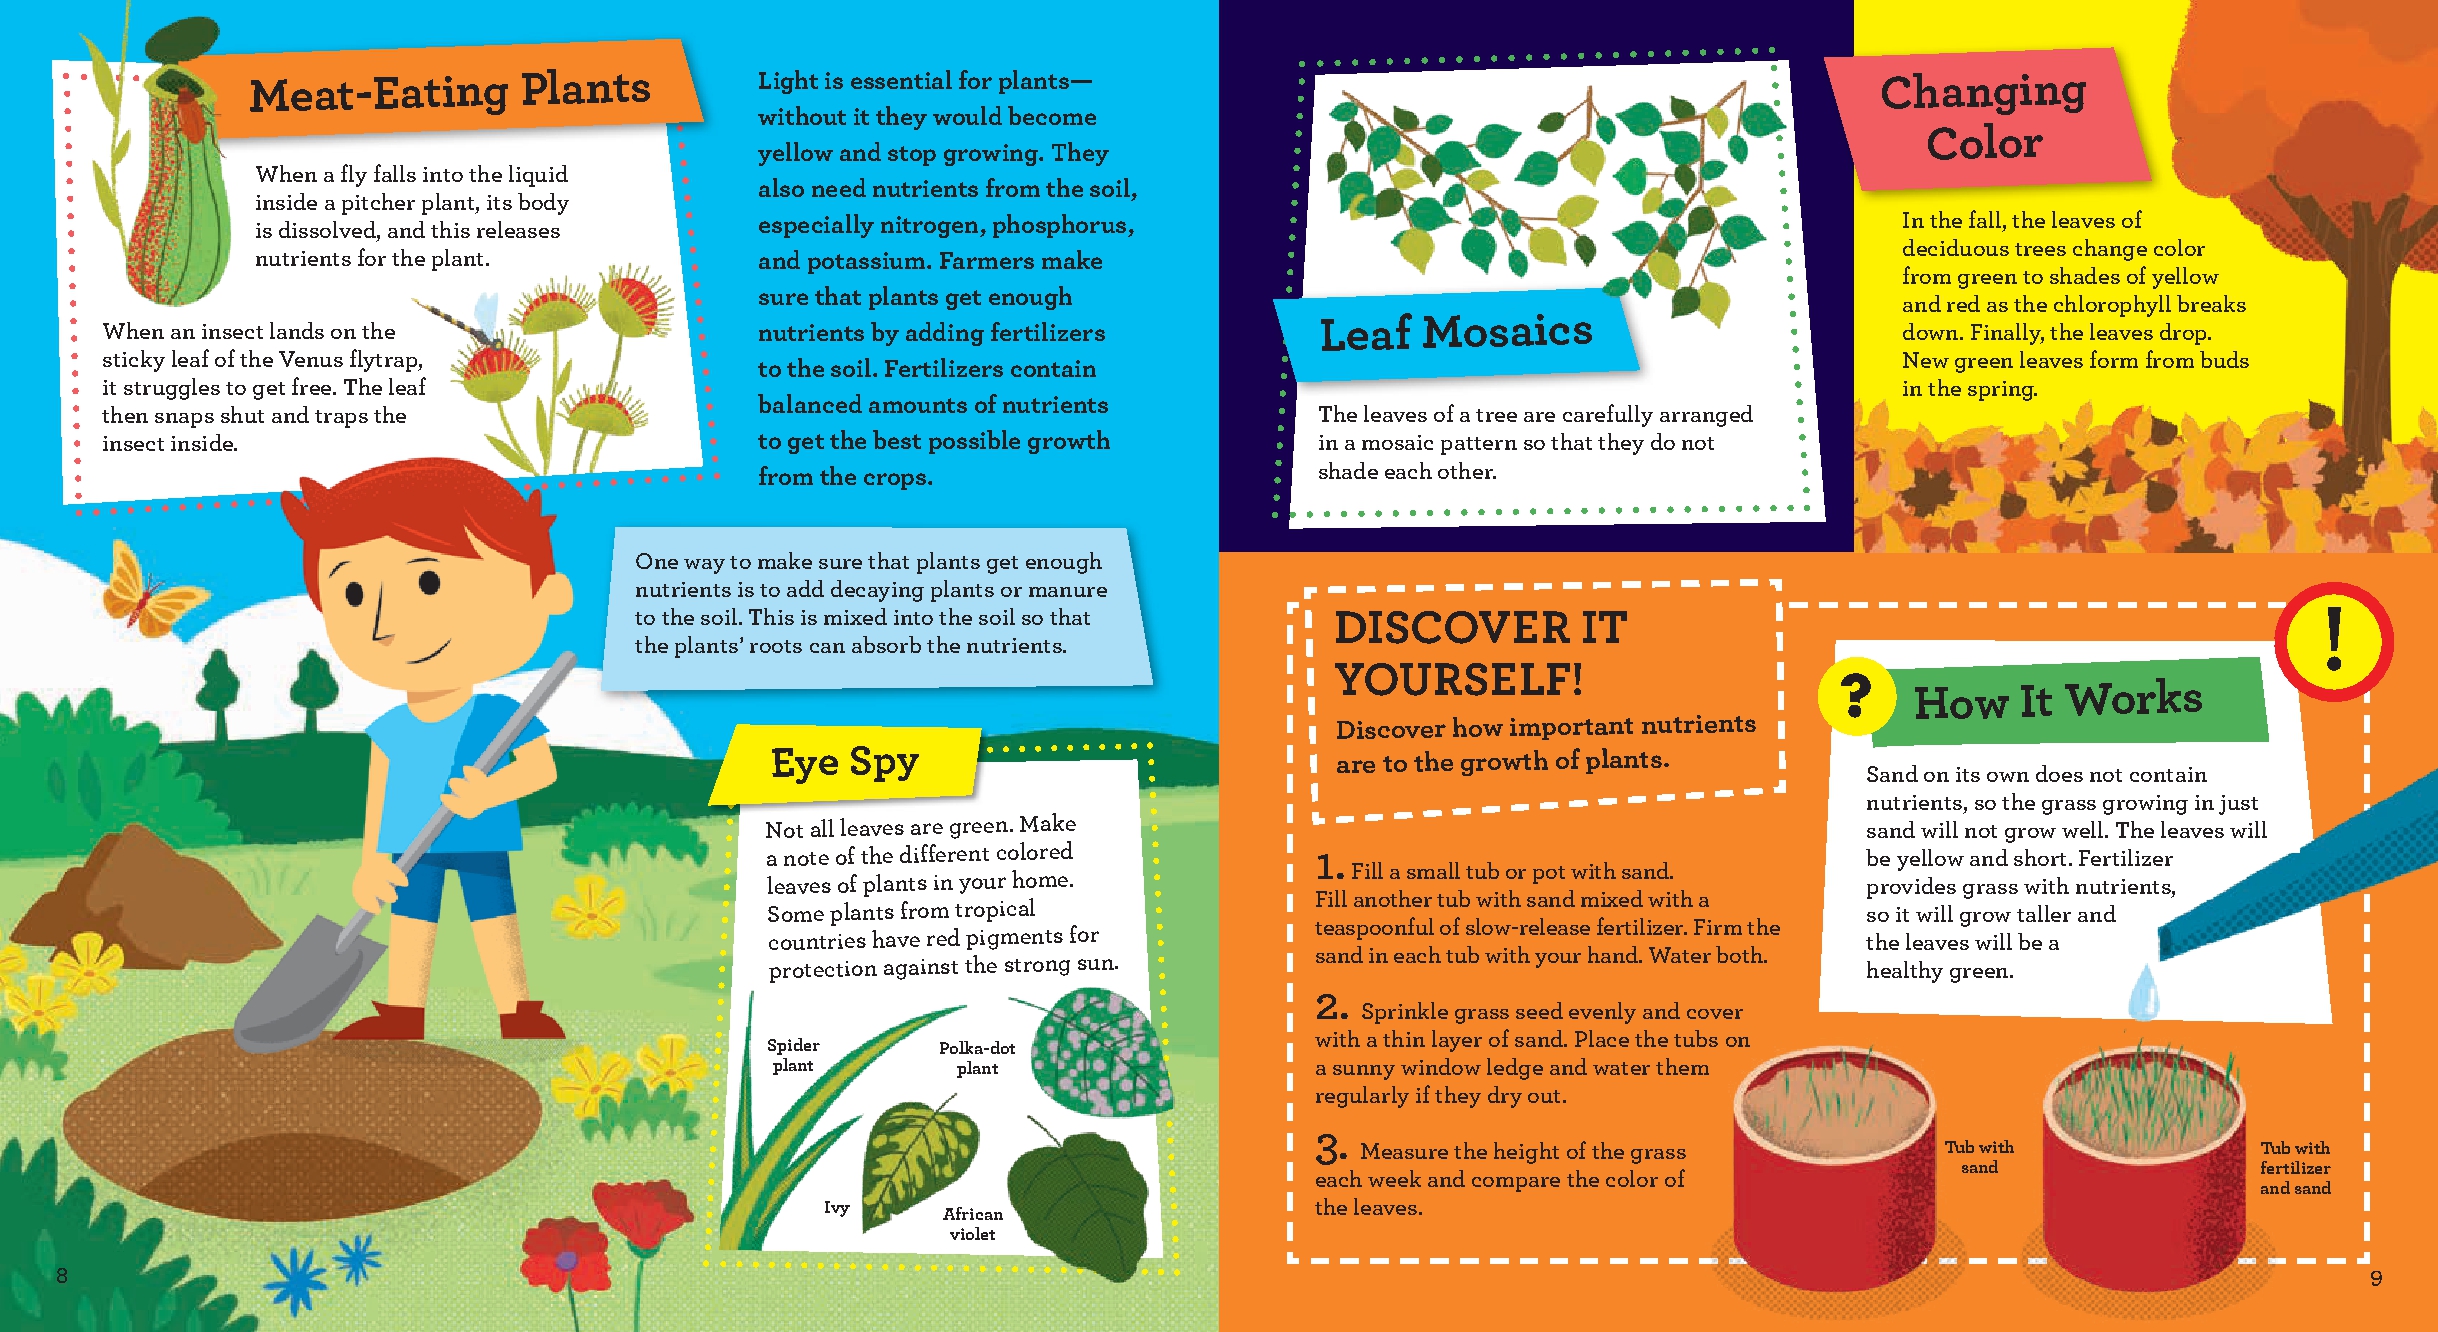 Discover it Yourself: Plants and Flowers